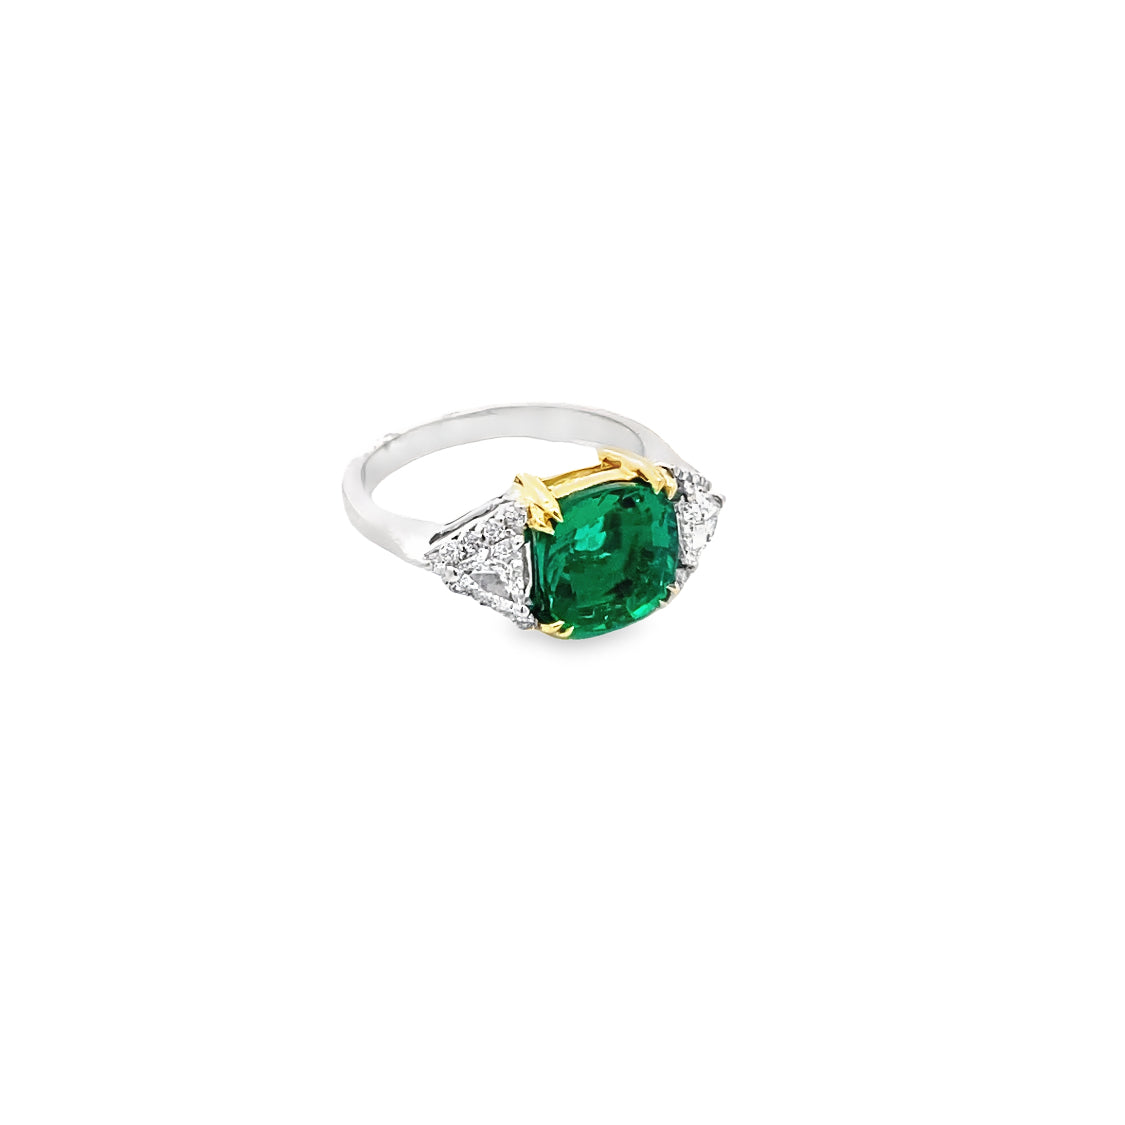 Cushion-Cut Emerald andTrillion-Cut Diamond Ring in 14K White Gold and 18K Yellow Gold